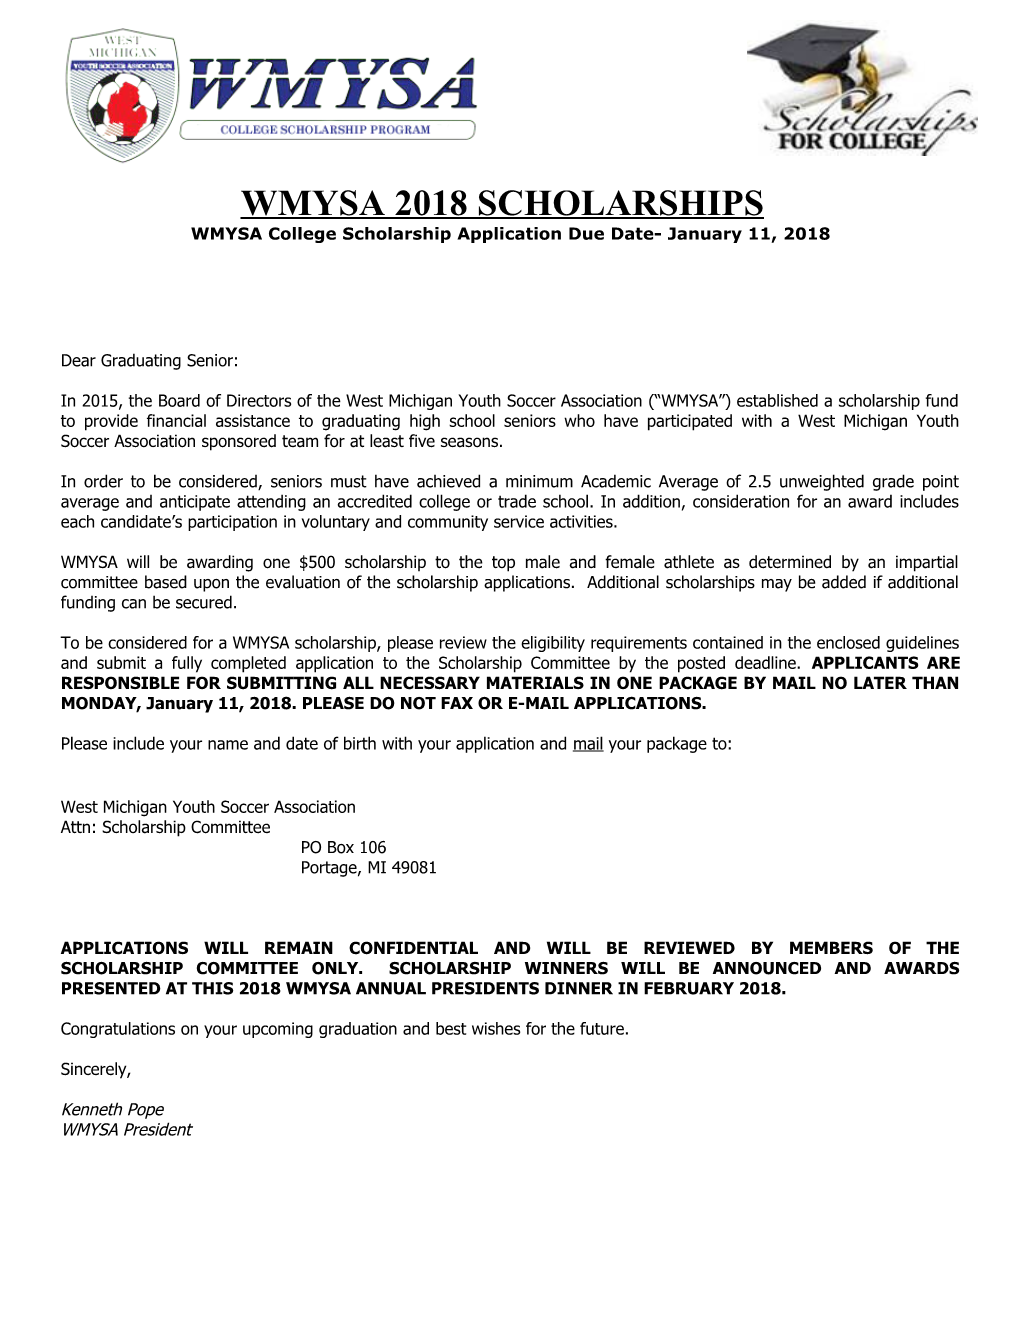 WMYSA College Scholarship Application Due Date- January 11, 2018